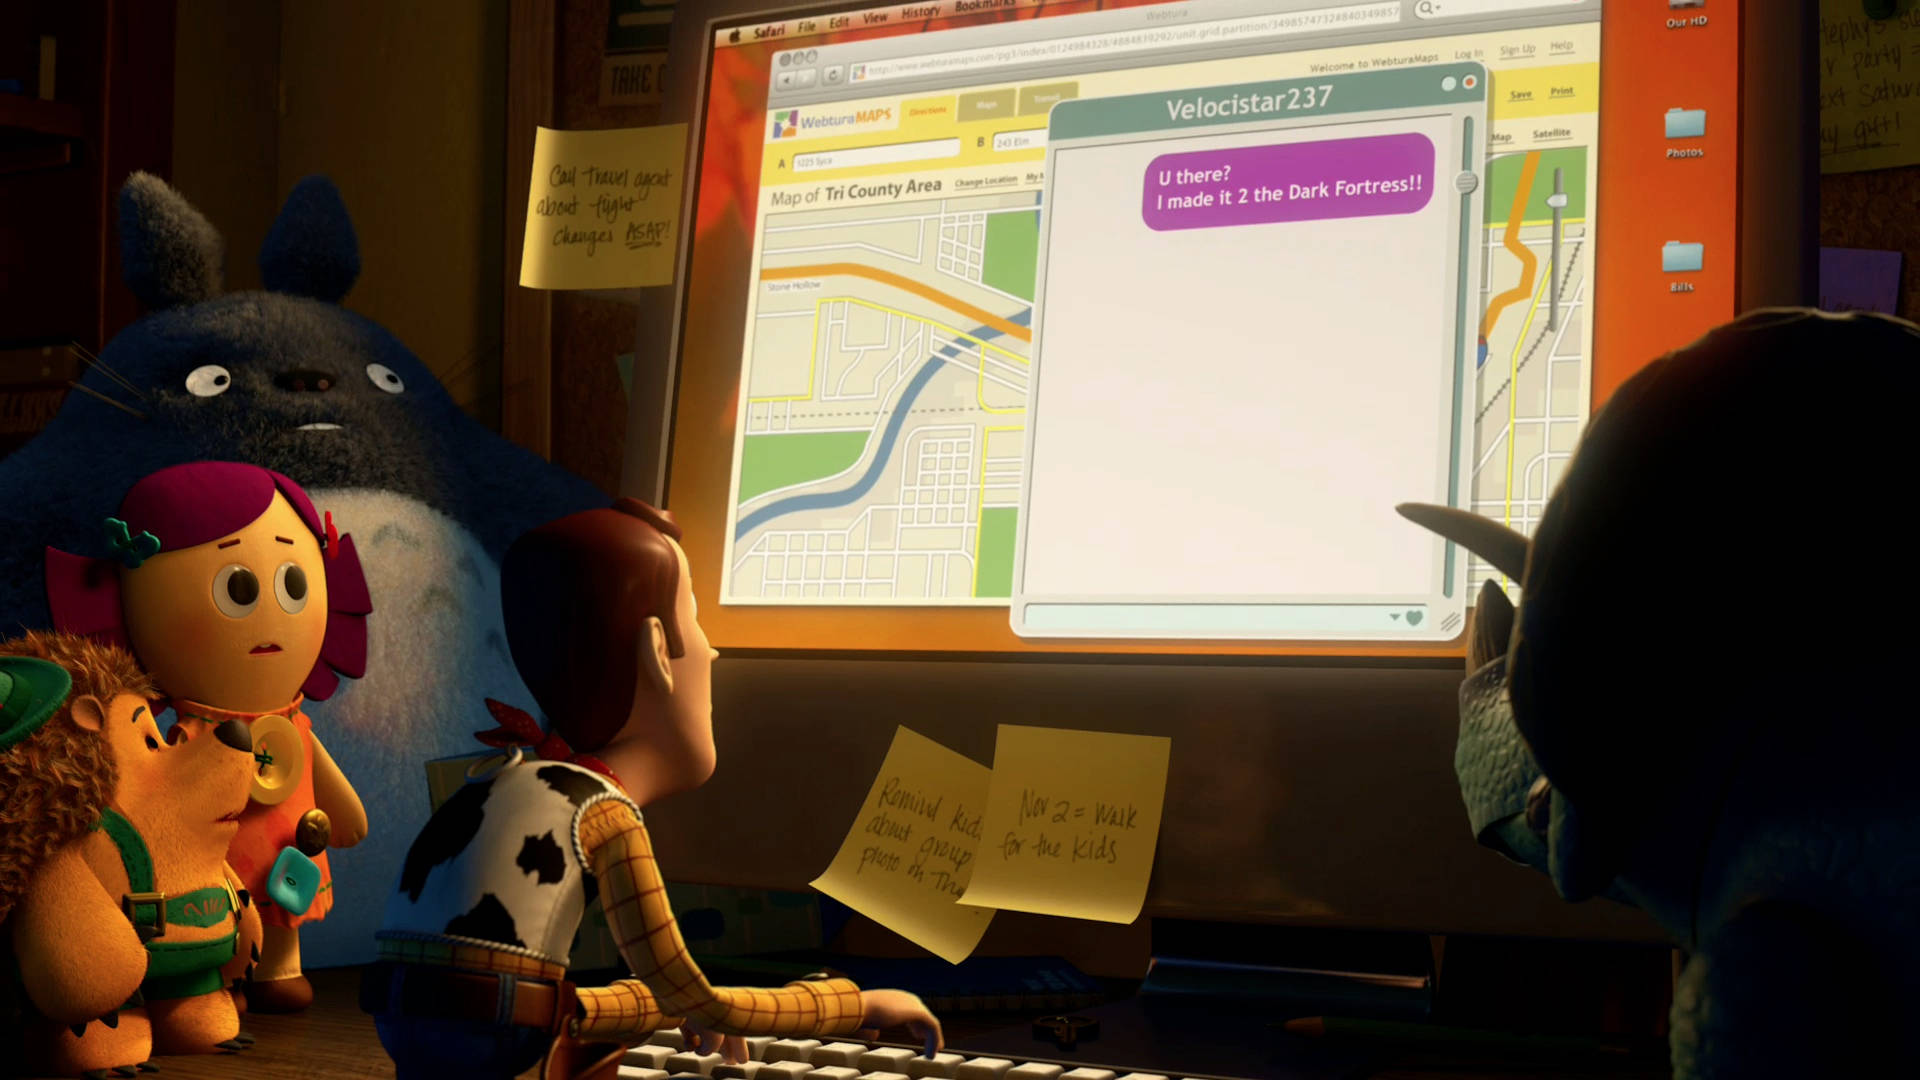 Toy Story 3 Toys In Computer Room Wallpaper